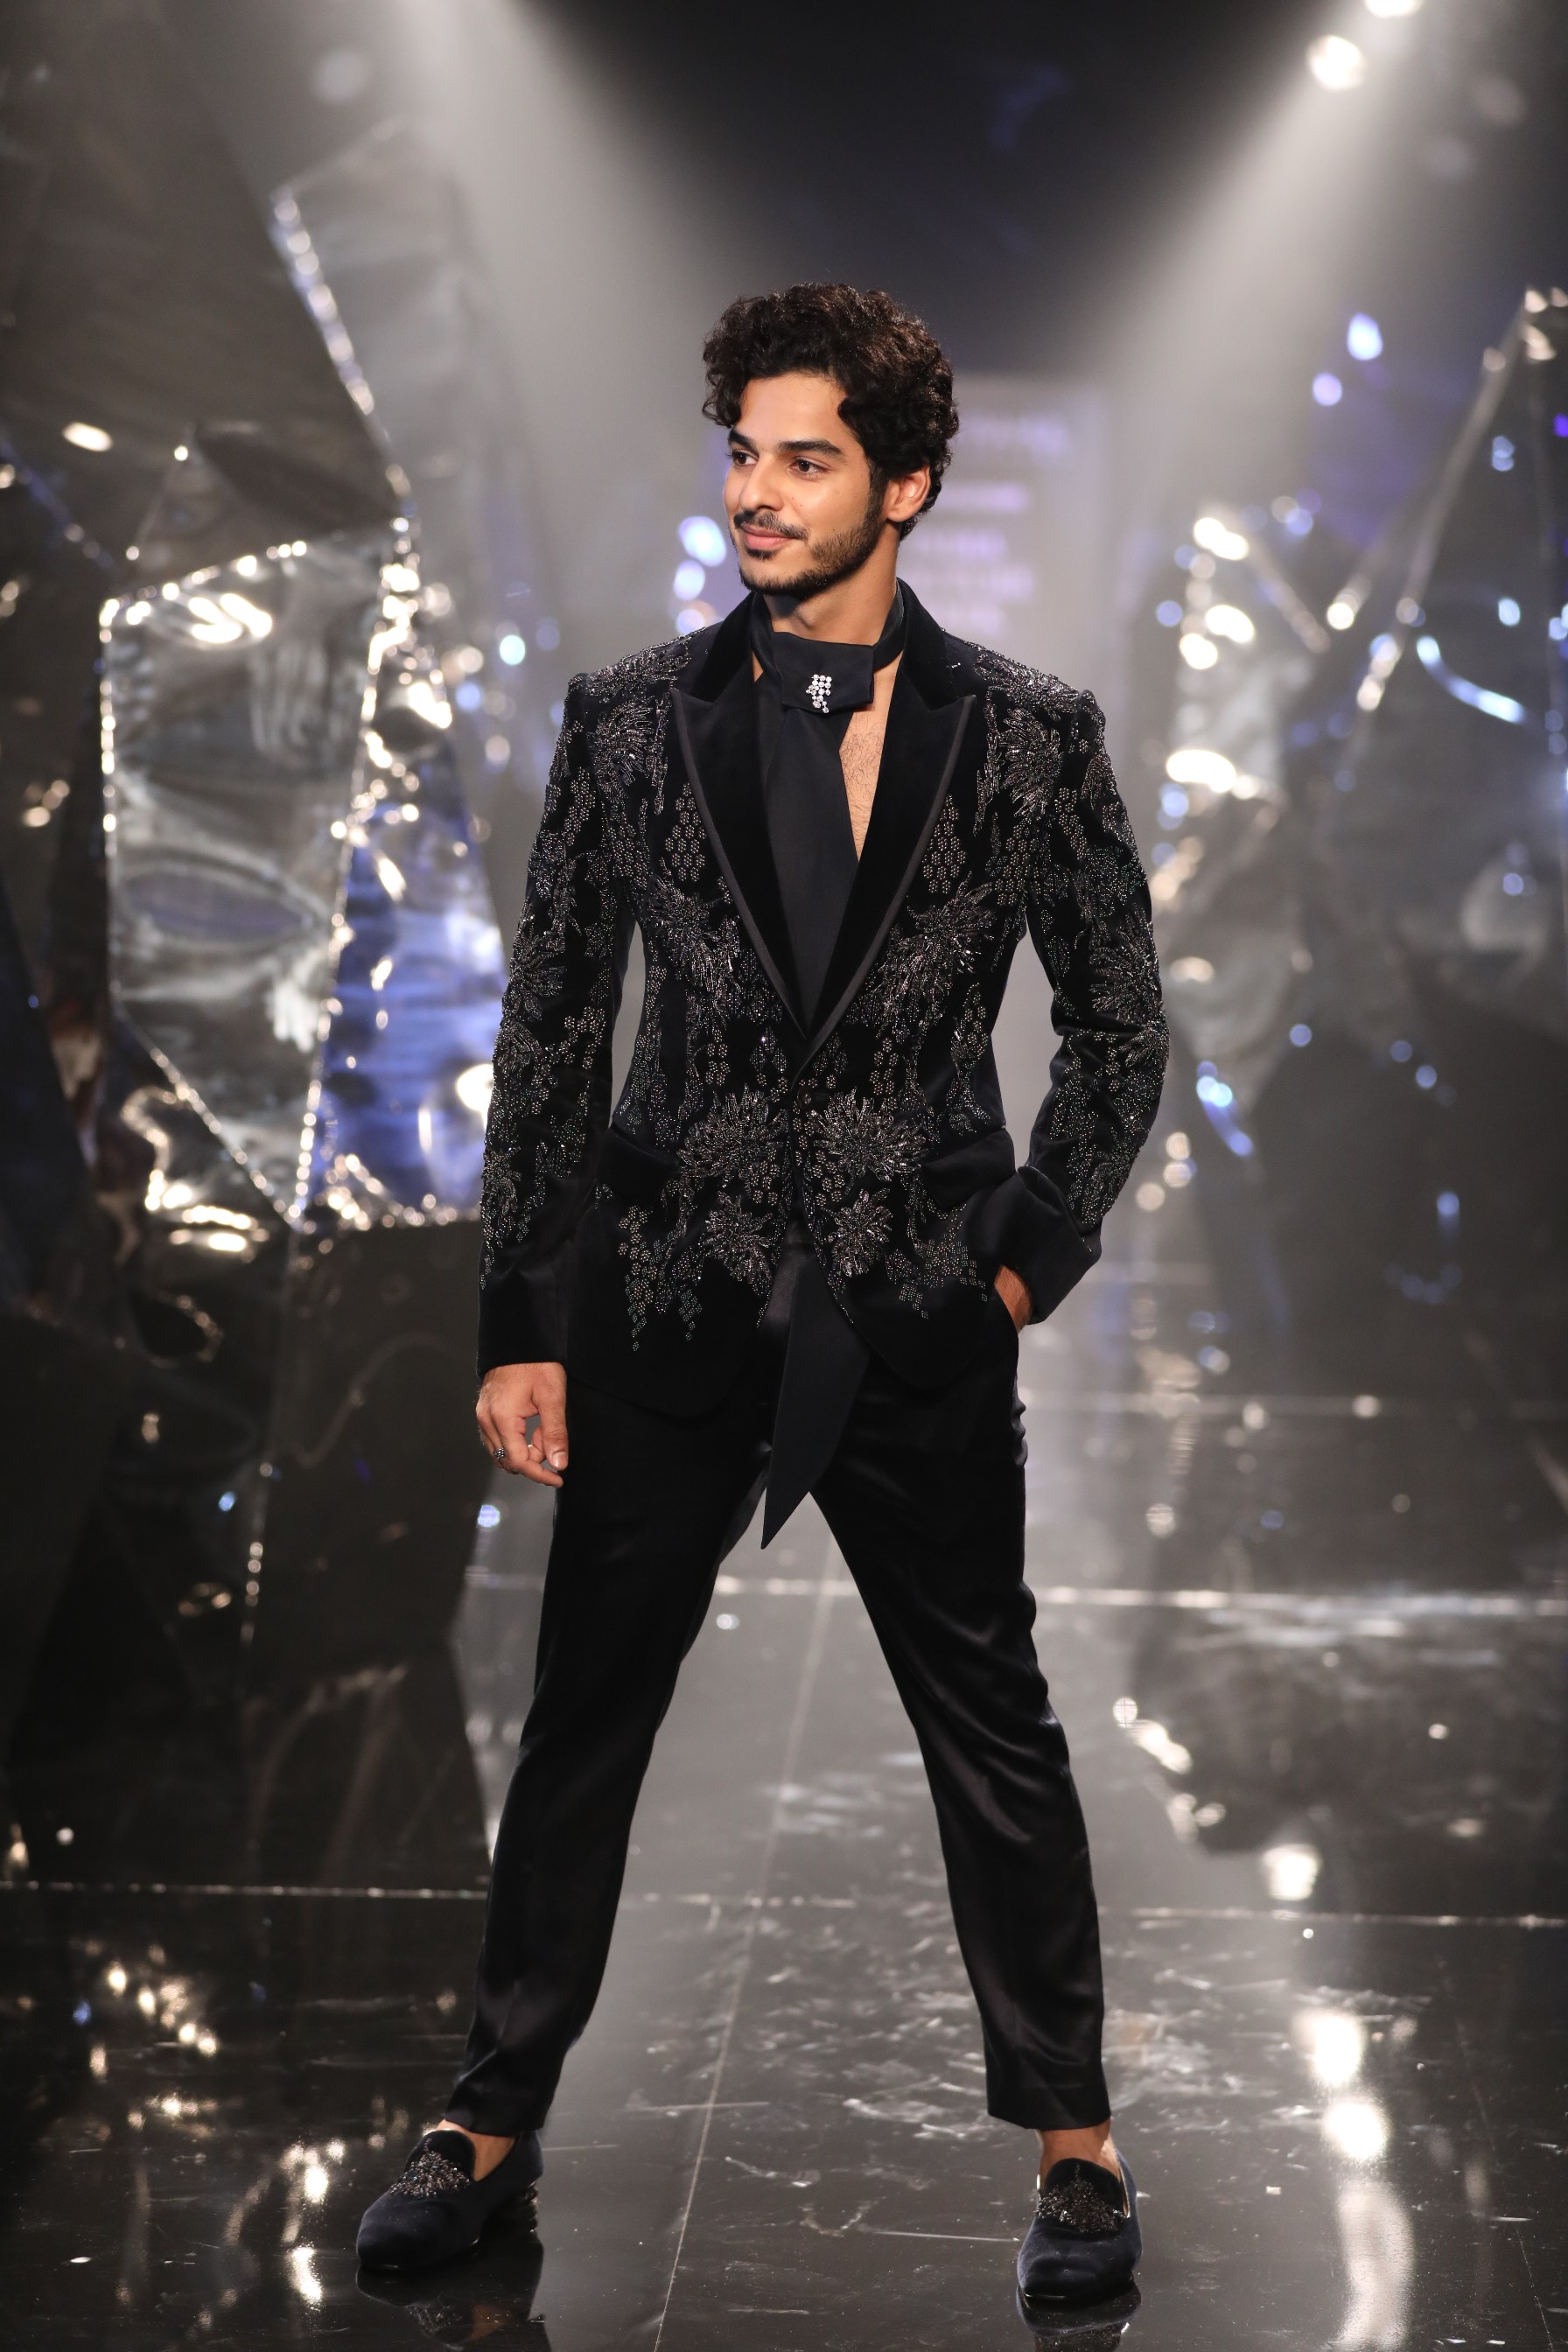 Actor Ishaan Khatter in Rohit Gandhi and Rahul Khanna collection at FDCI Hyundai India Couture Week 